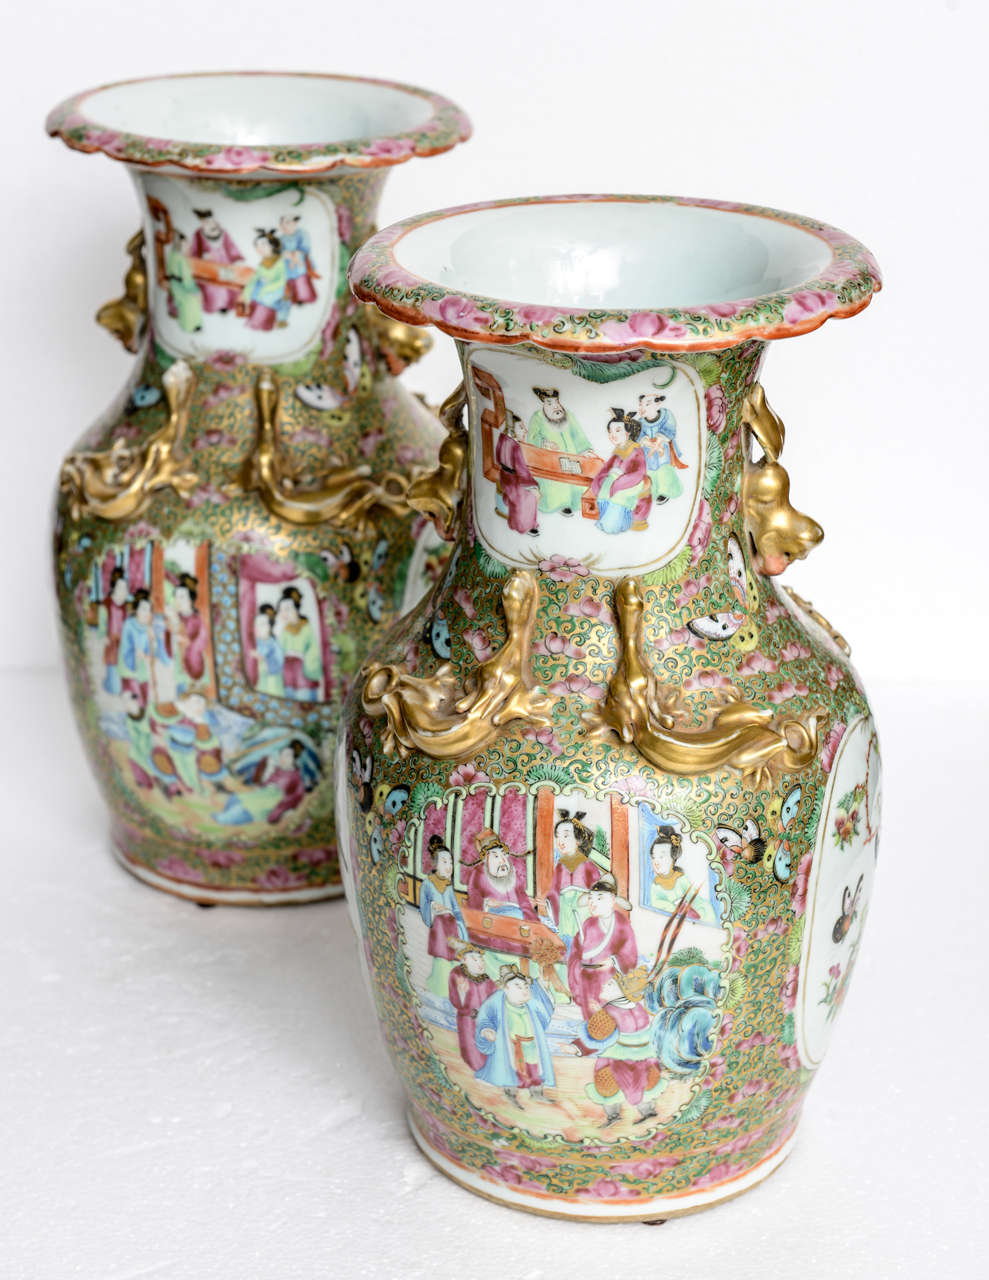 Rare Pair of Chinese Porcelain Famille Rose Vases, 19th Century For Sale 3